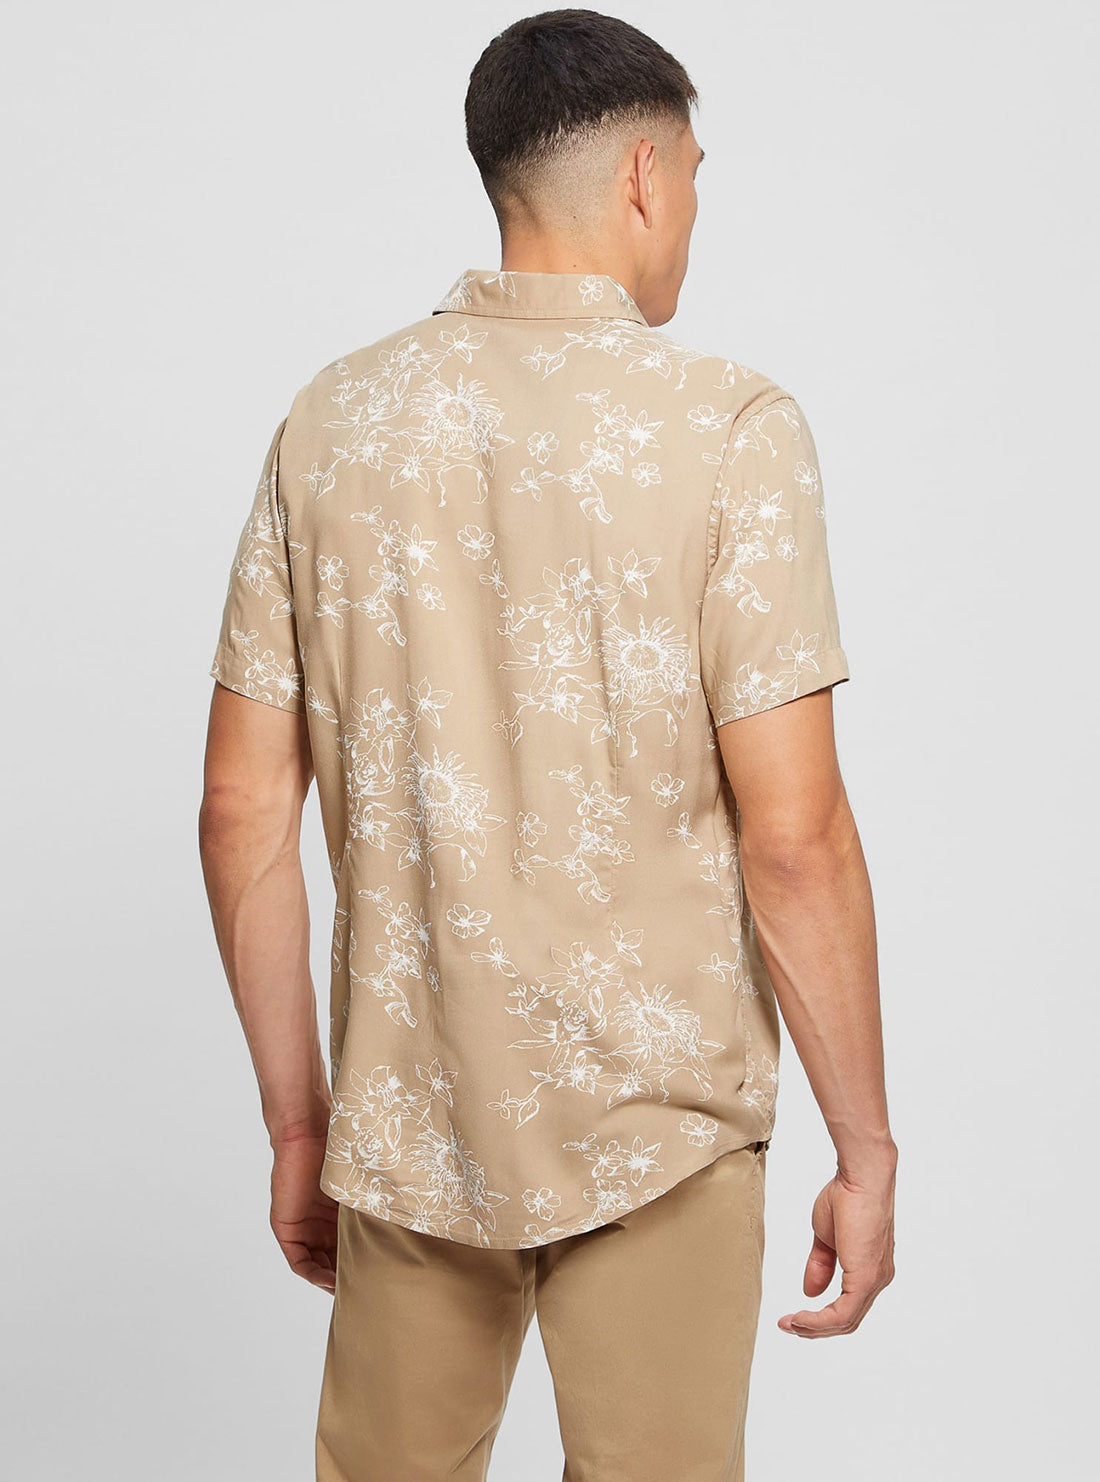 Eco Rayon Sienna Floral Shirt | GUESS Men's | Back view